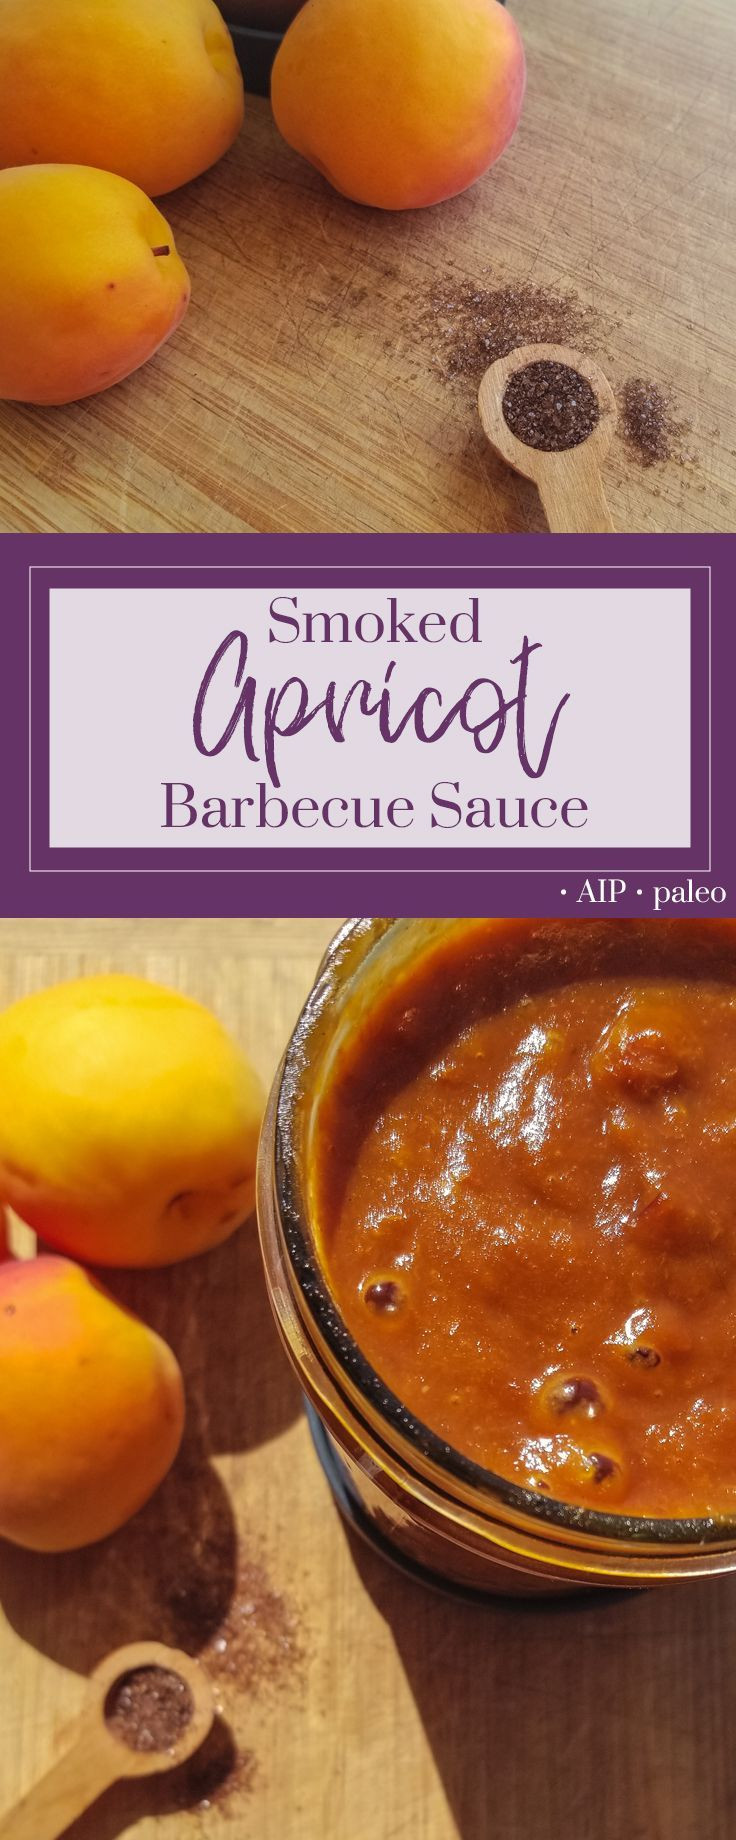 Apricot Bbq Sauce
 Smoked Apricot Barbecue Sauce Recipe in 2020